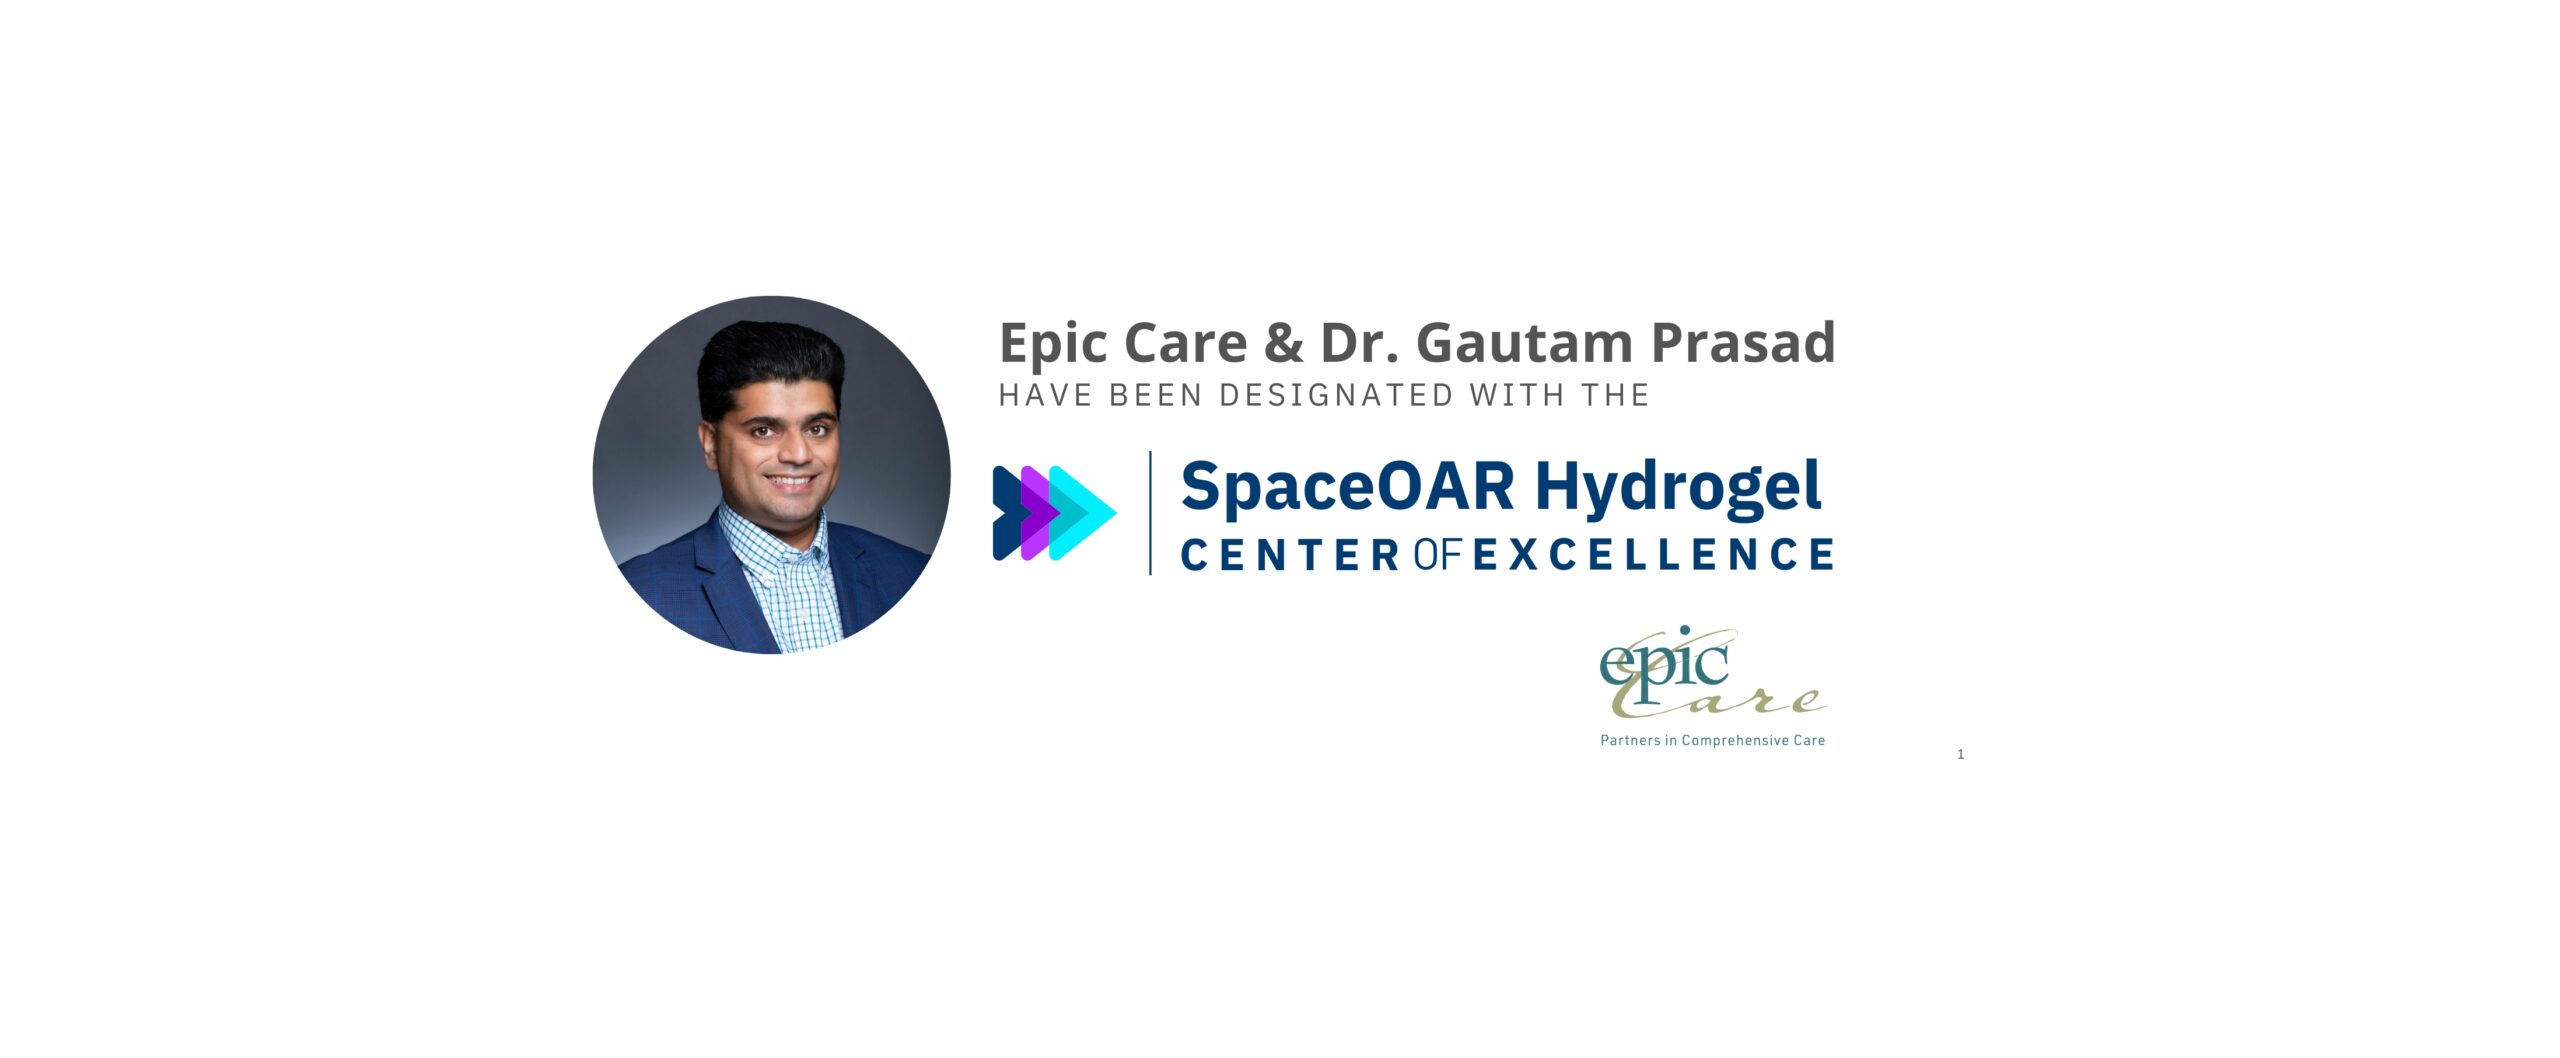 Epic Care & Dr. Gautam Prasad Recognized with Northern California’s First Center of Excellence for SpaceOAR Hydrogel!